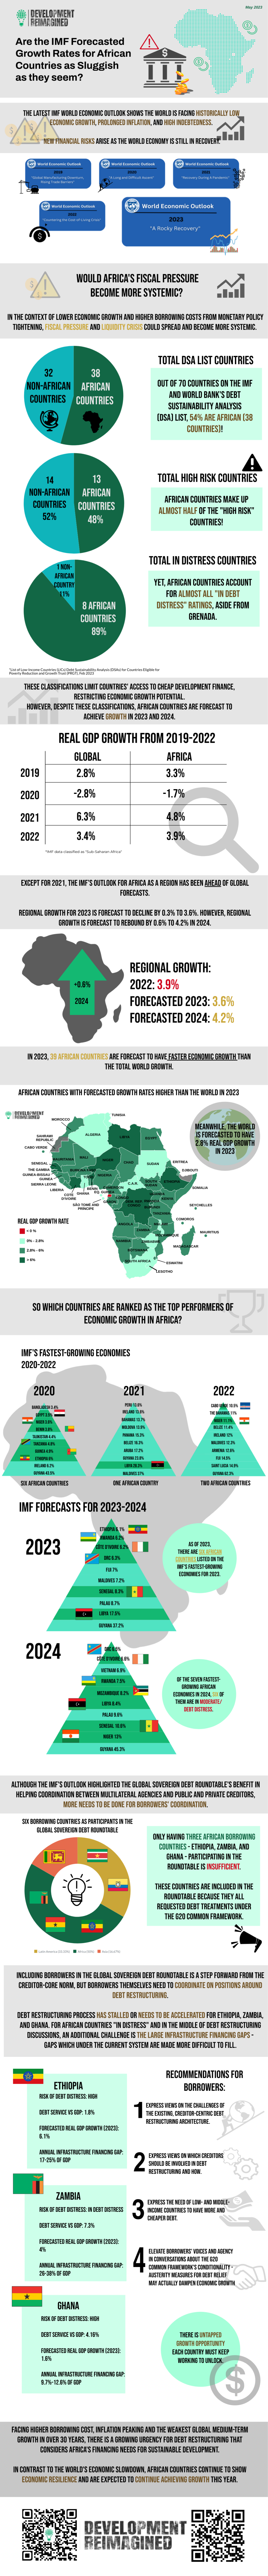 How African economies can easily recover from the COVID-19